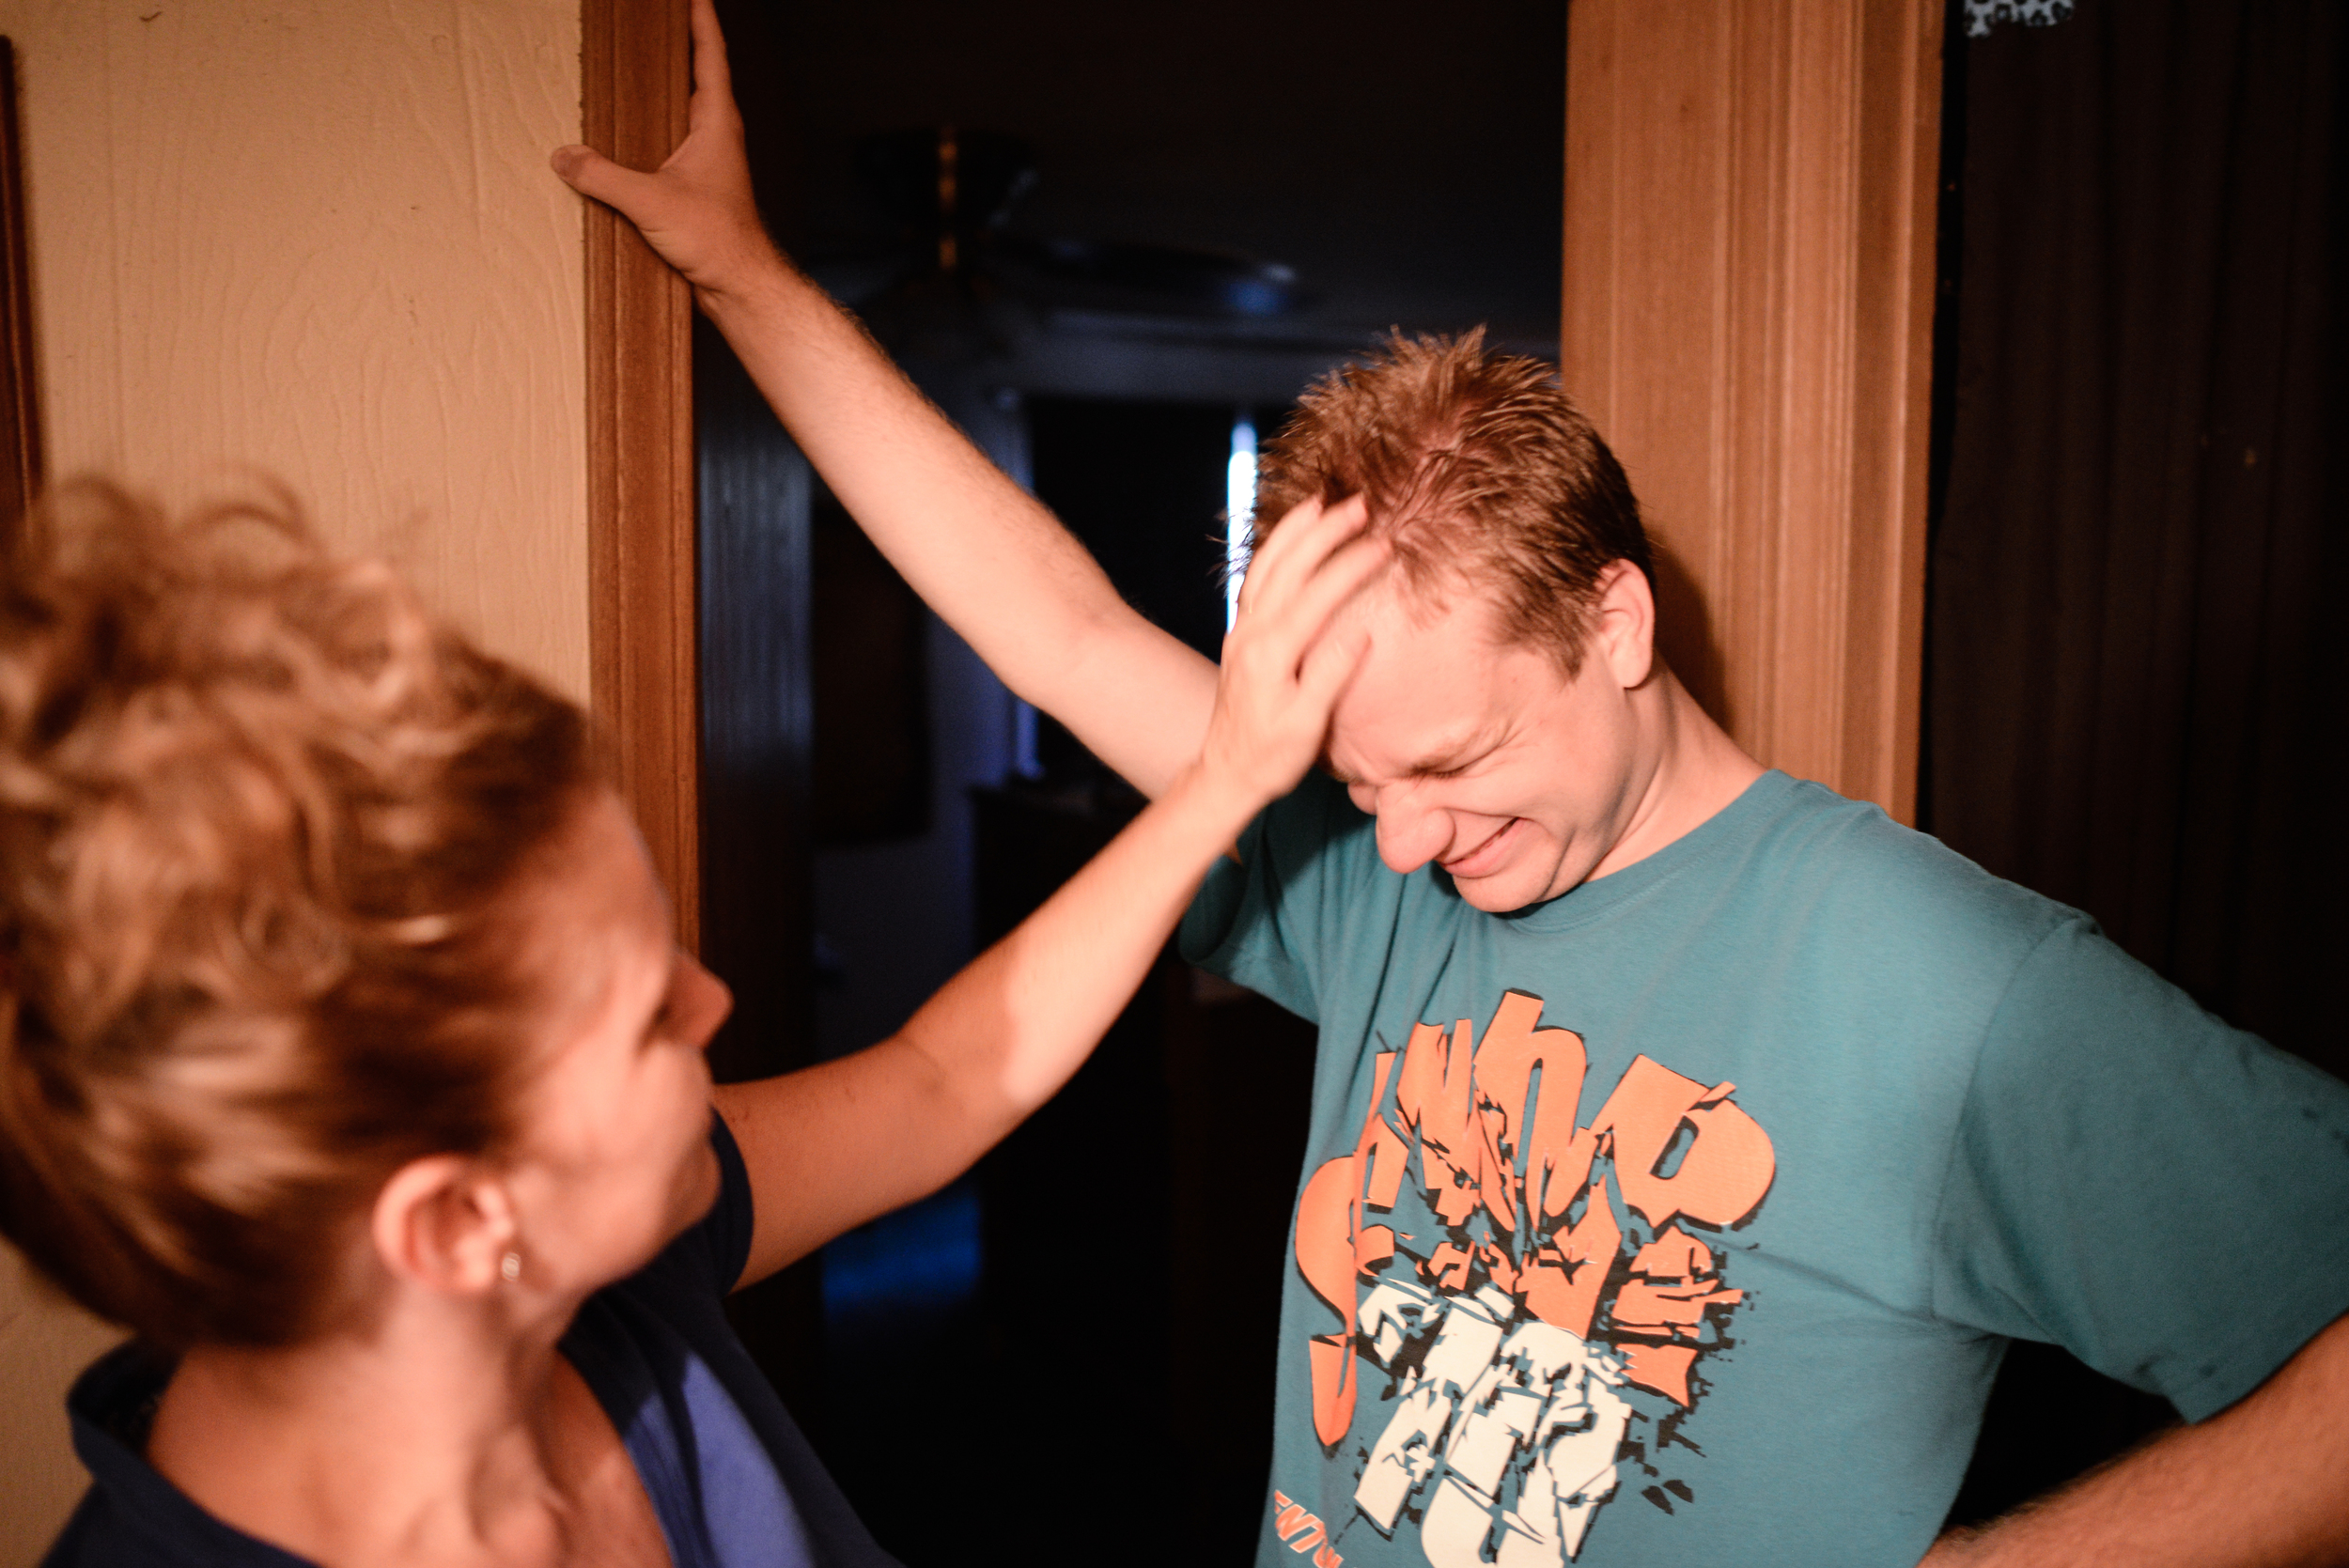  Trenton, Missouri. 2013.  Dalton's mother, Joyce, shows affection before she leaves for work in the morning. 